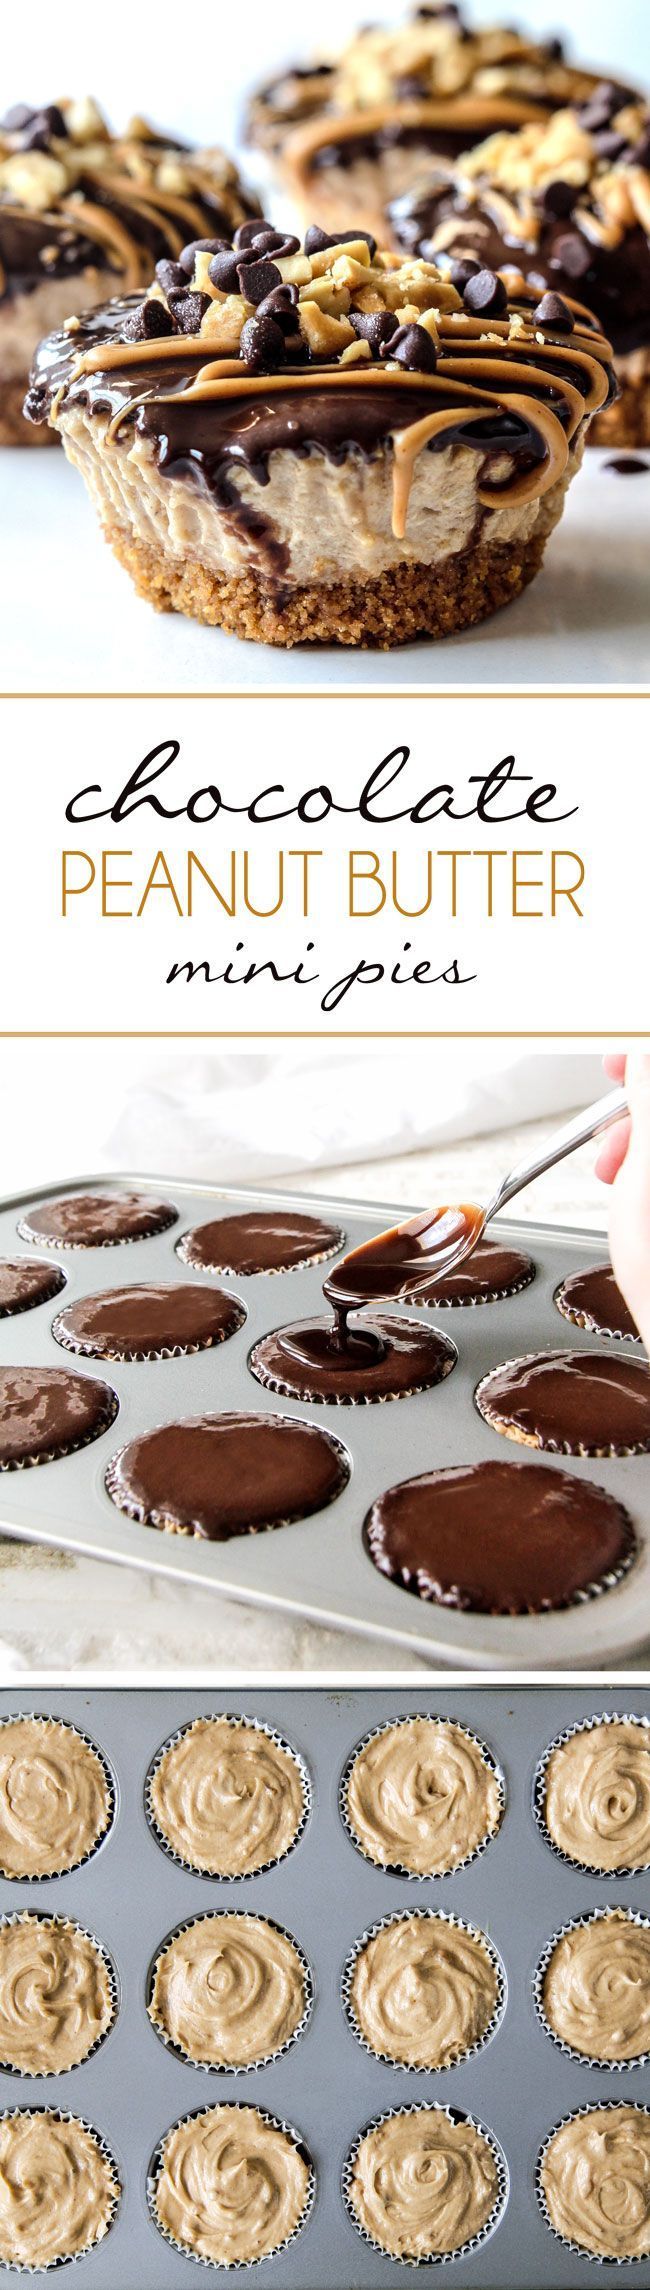 Mini Chocolate Peanut Butter Pies are easy, make ahead, almost NO BAKE and, decadently DELICIOUS with toffee graham cracker crust,